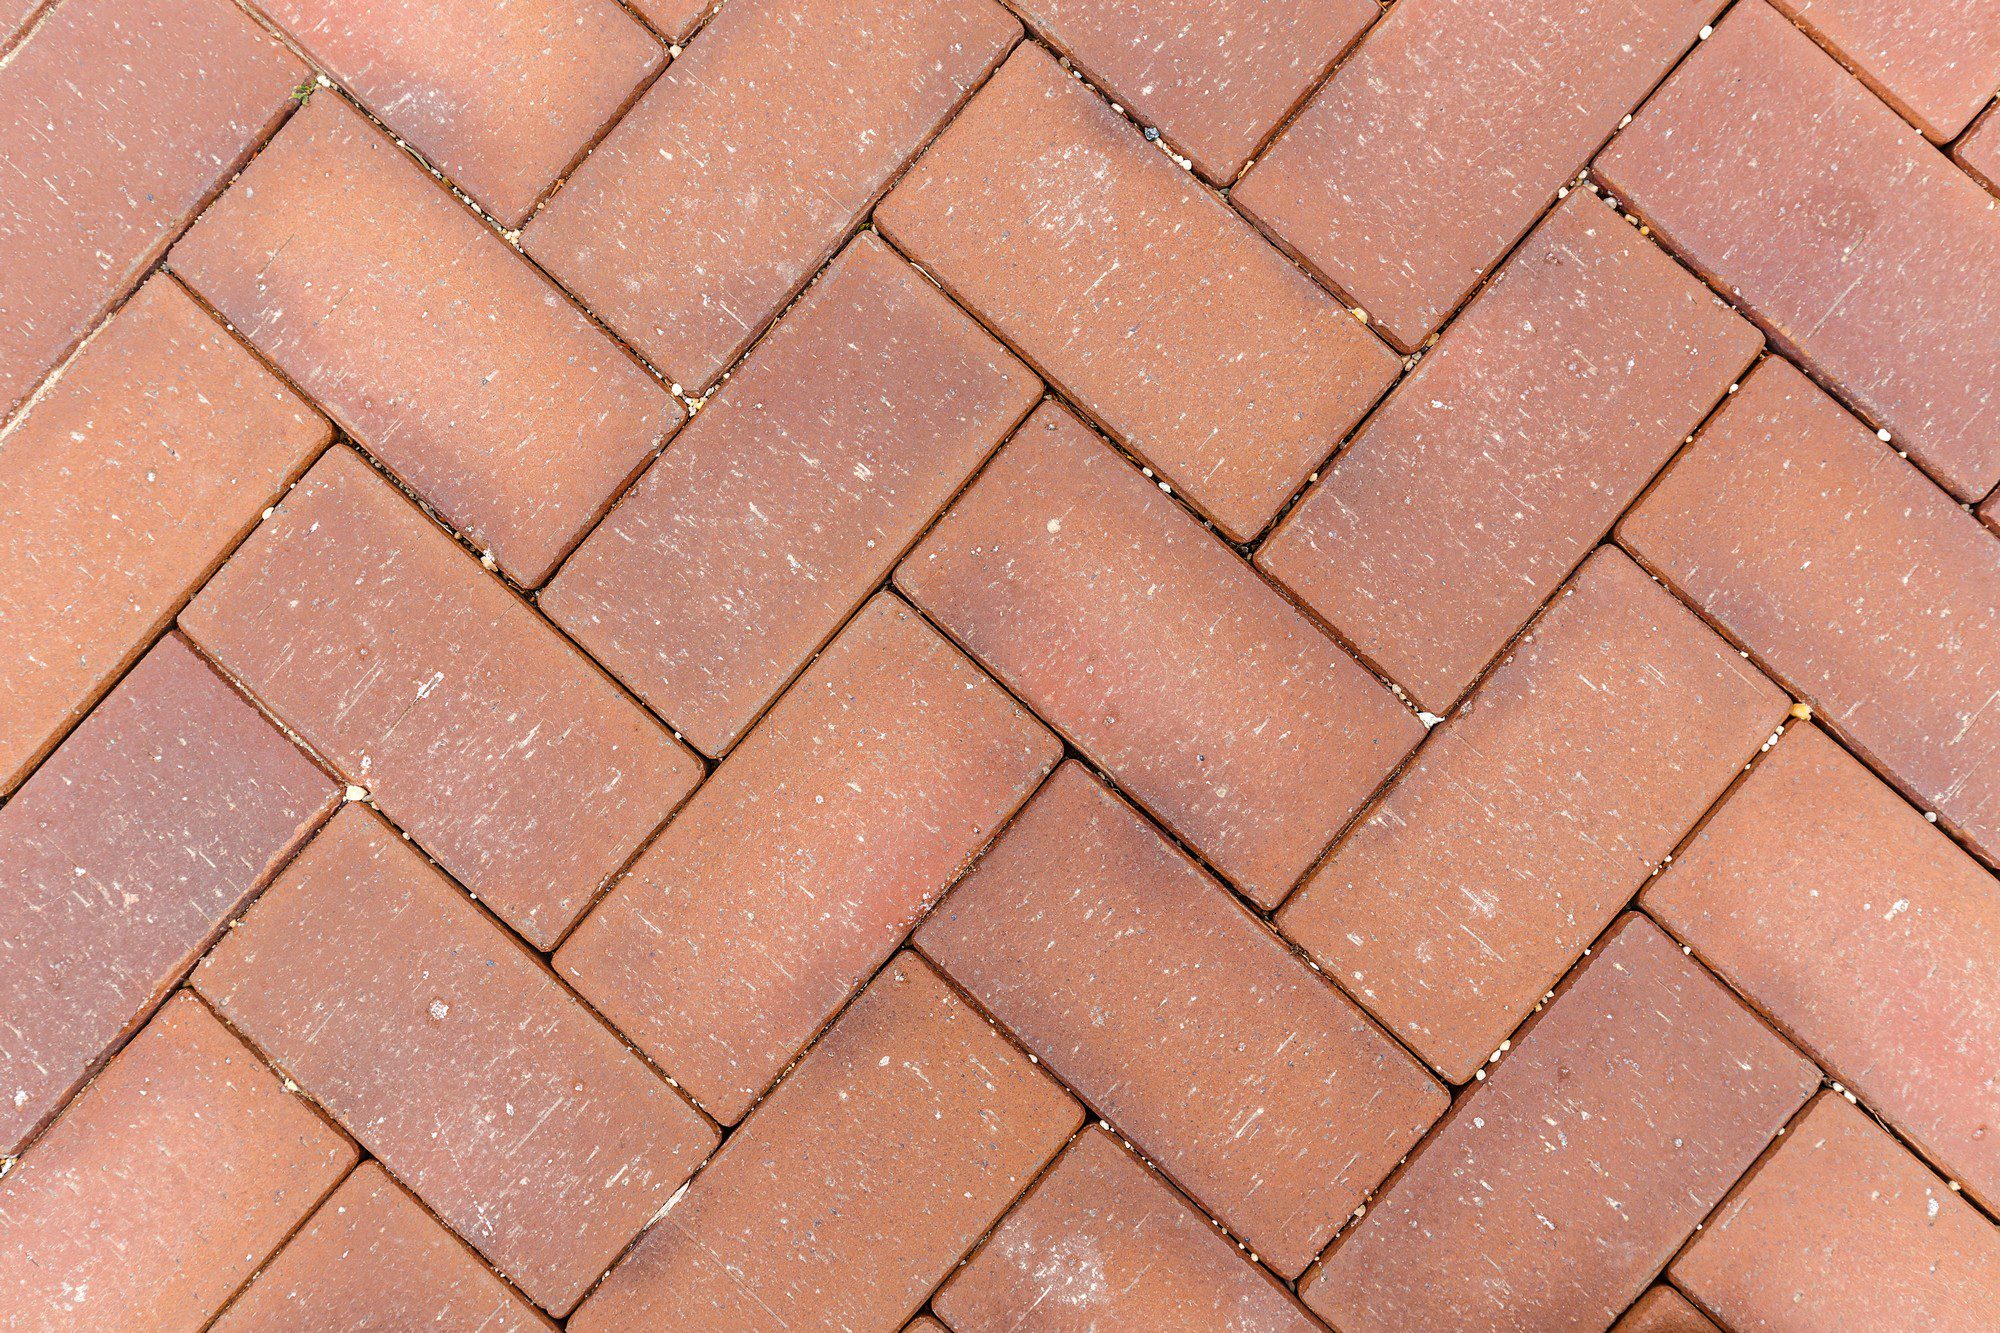 The image shows a herringbone patterned brick pavement. The bricks are rectangular and have a consistent reddish-brown colour, and they are laid in an interlocking arrangement that forms a zigzag pattern. The joints between the bricks are filled with sand or fine gravel, and there are minimal signs of wear or weathering on the surface of the bricks. This type of paving is commonly used for walkways, driveways, and other outdoor surfaces due to its durability and visual appeal.